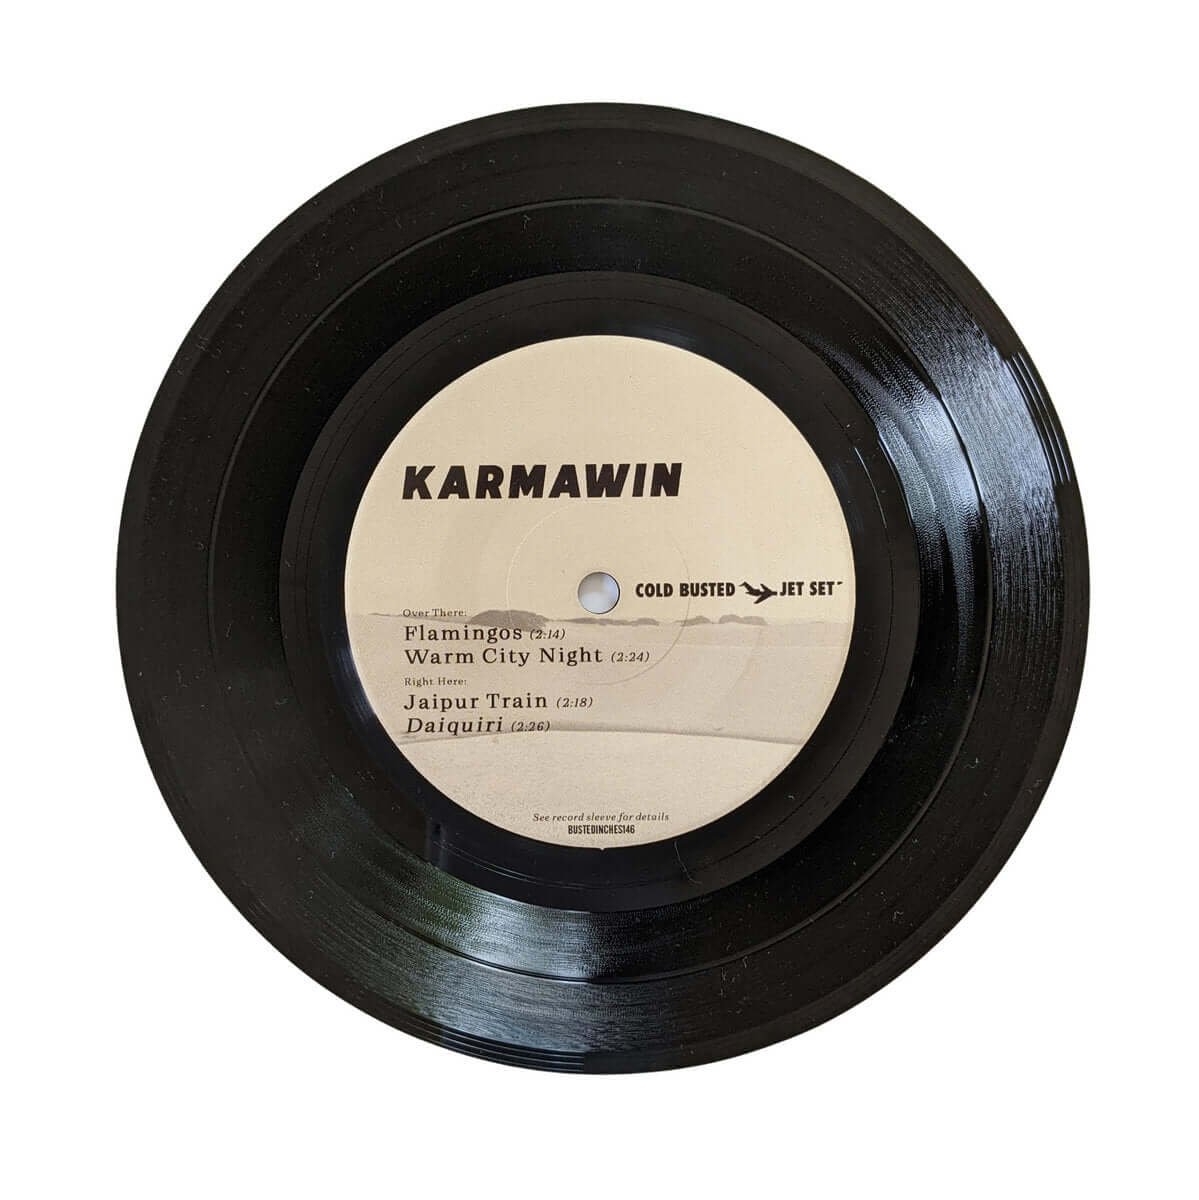 Karmawin - Daiquiri - Limited Edition 7 Inch Vinyl - Cold Busted